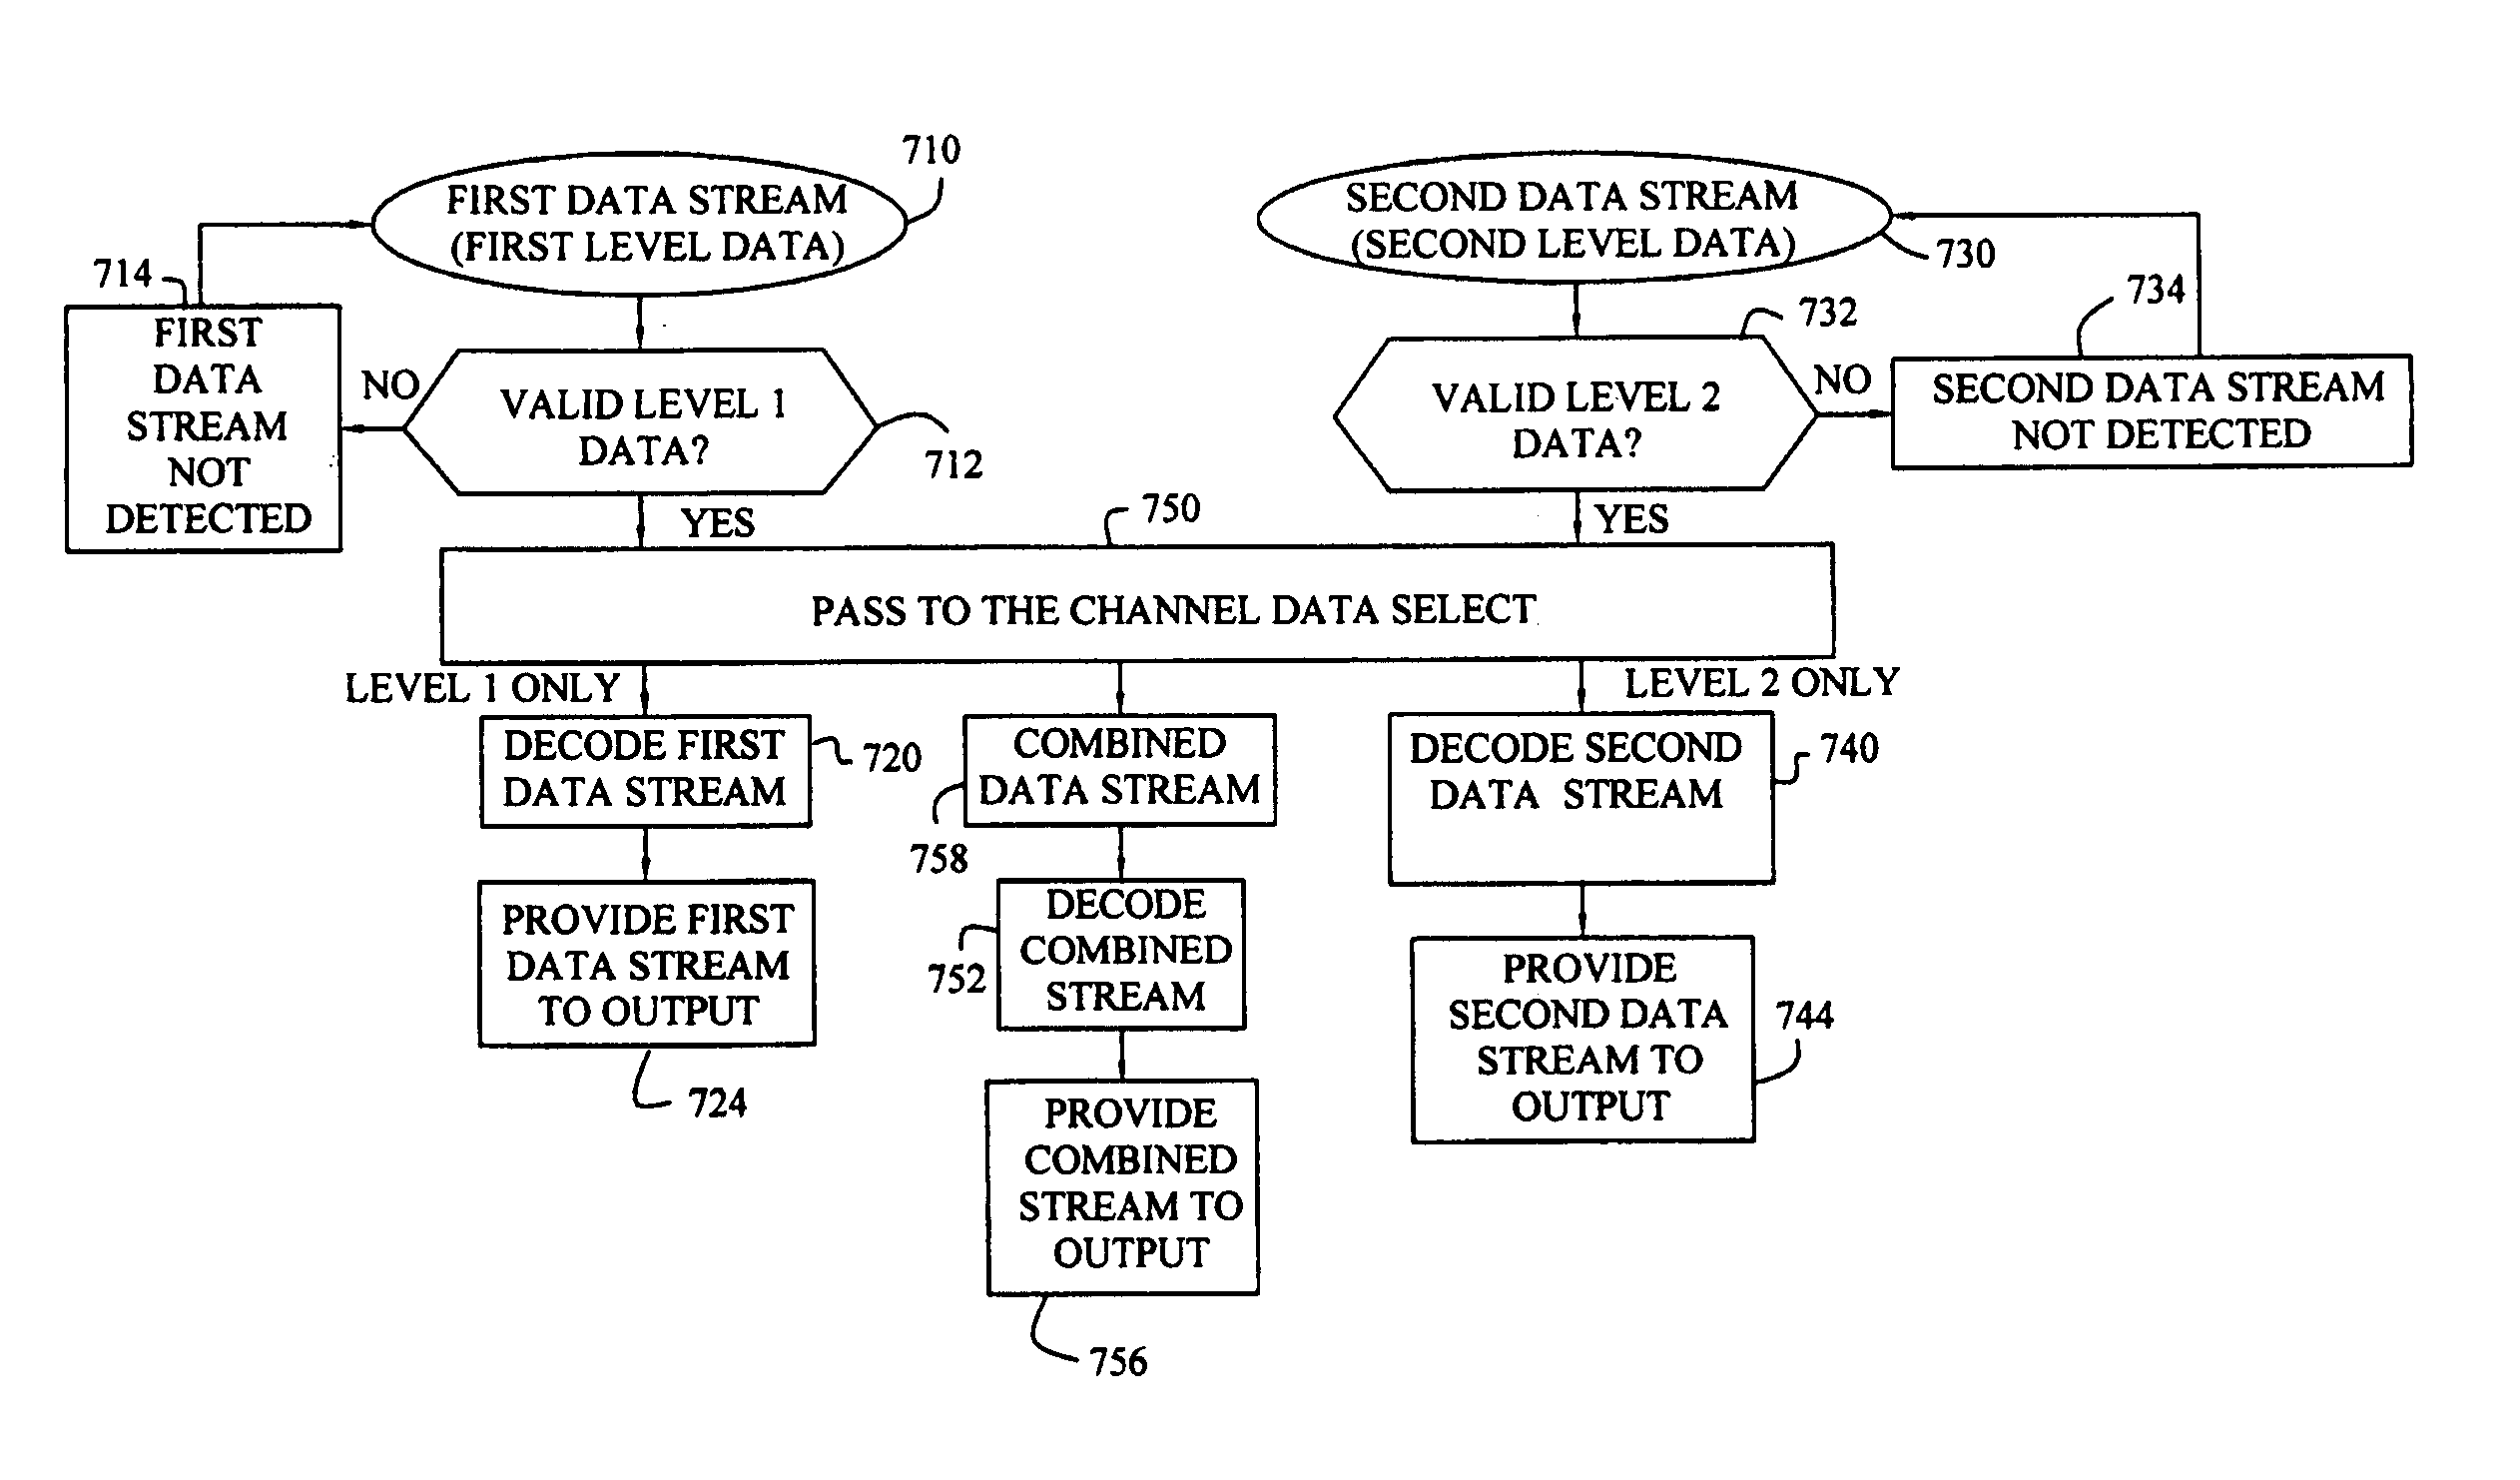 Method to create hierarchical modulation in OFDM